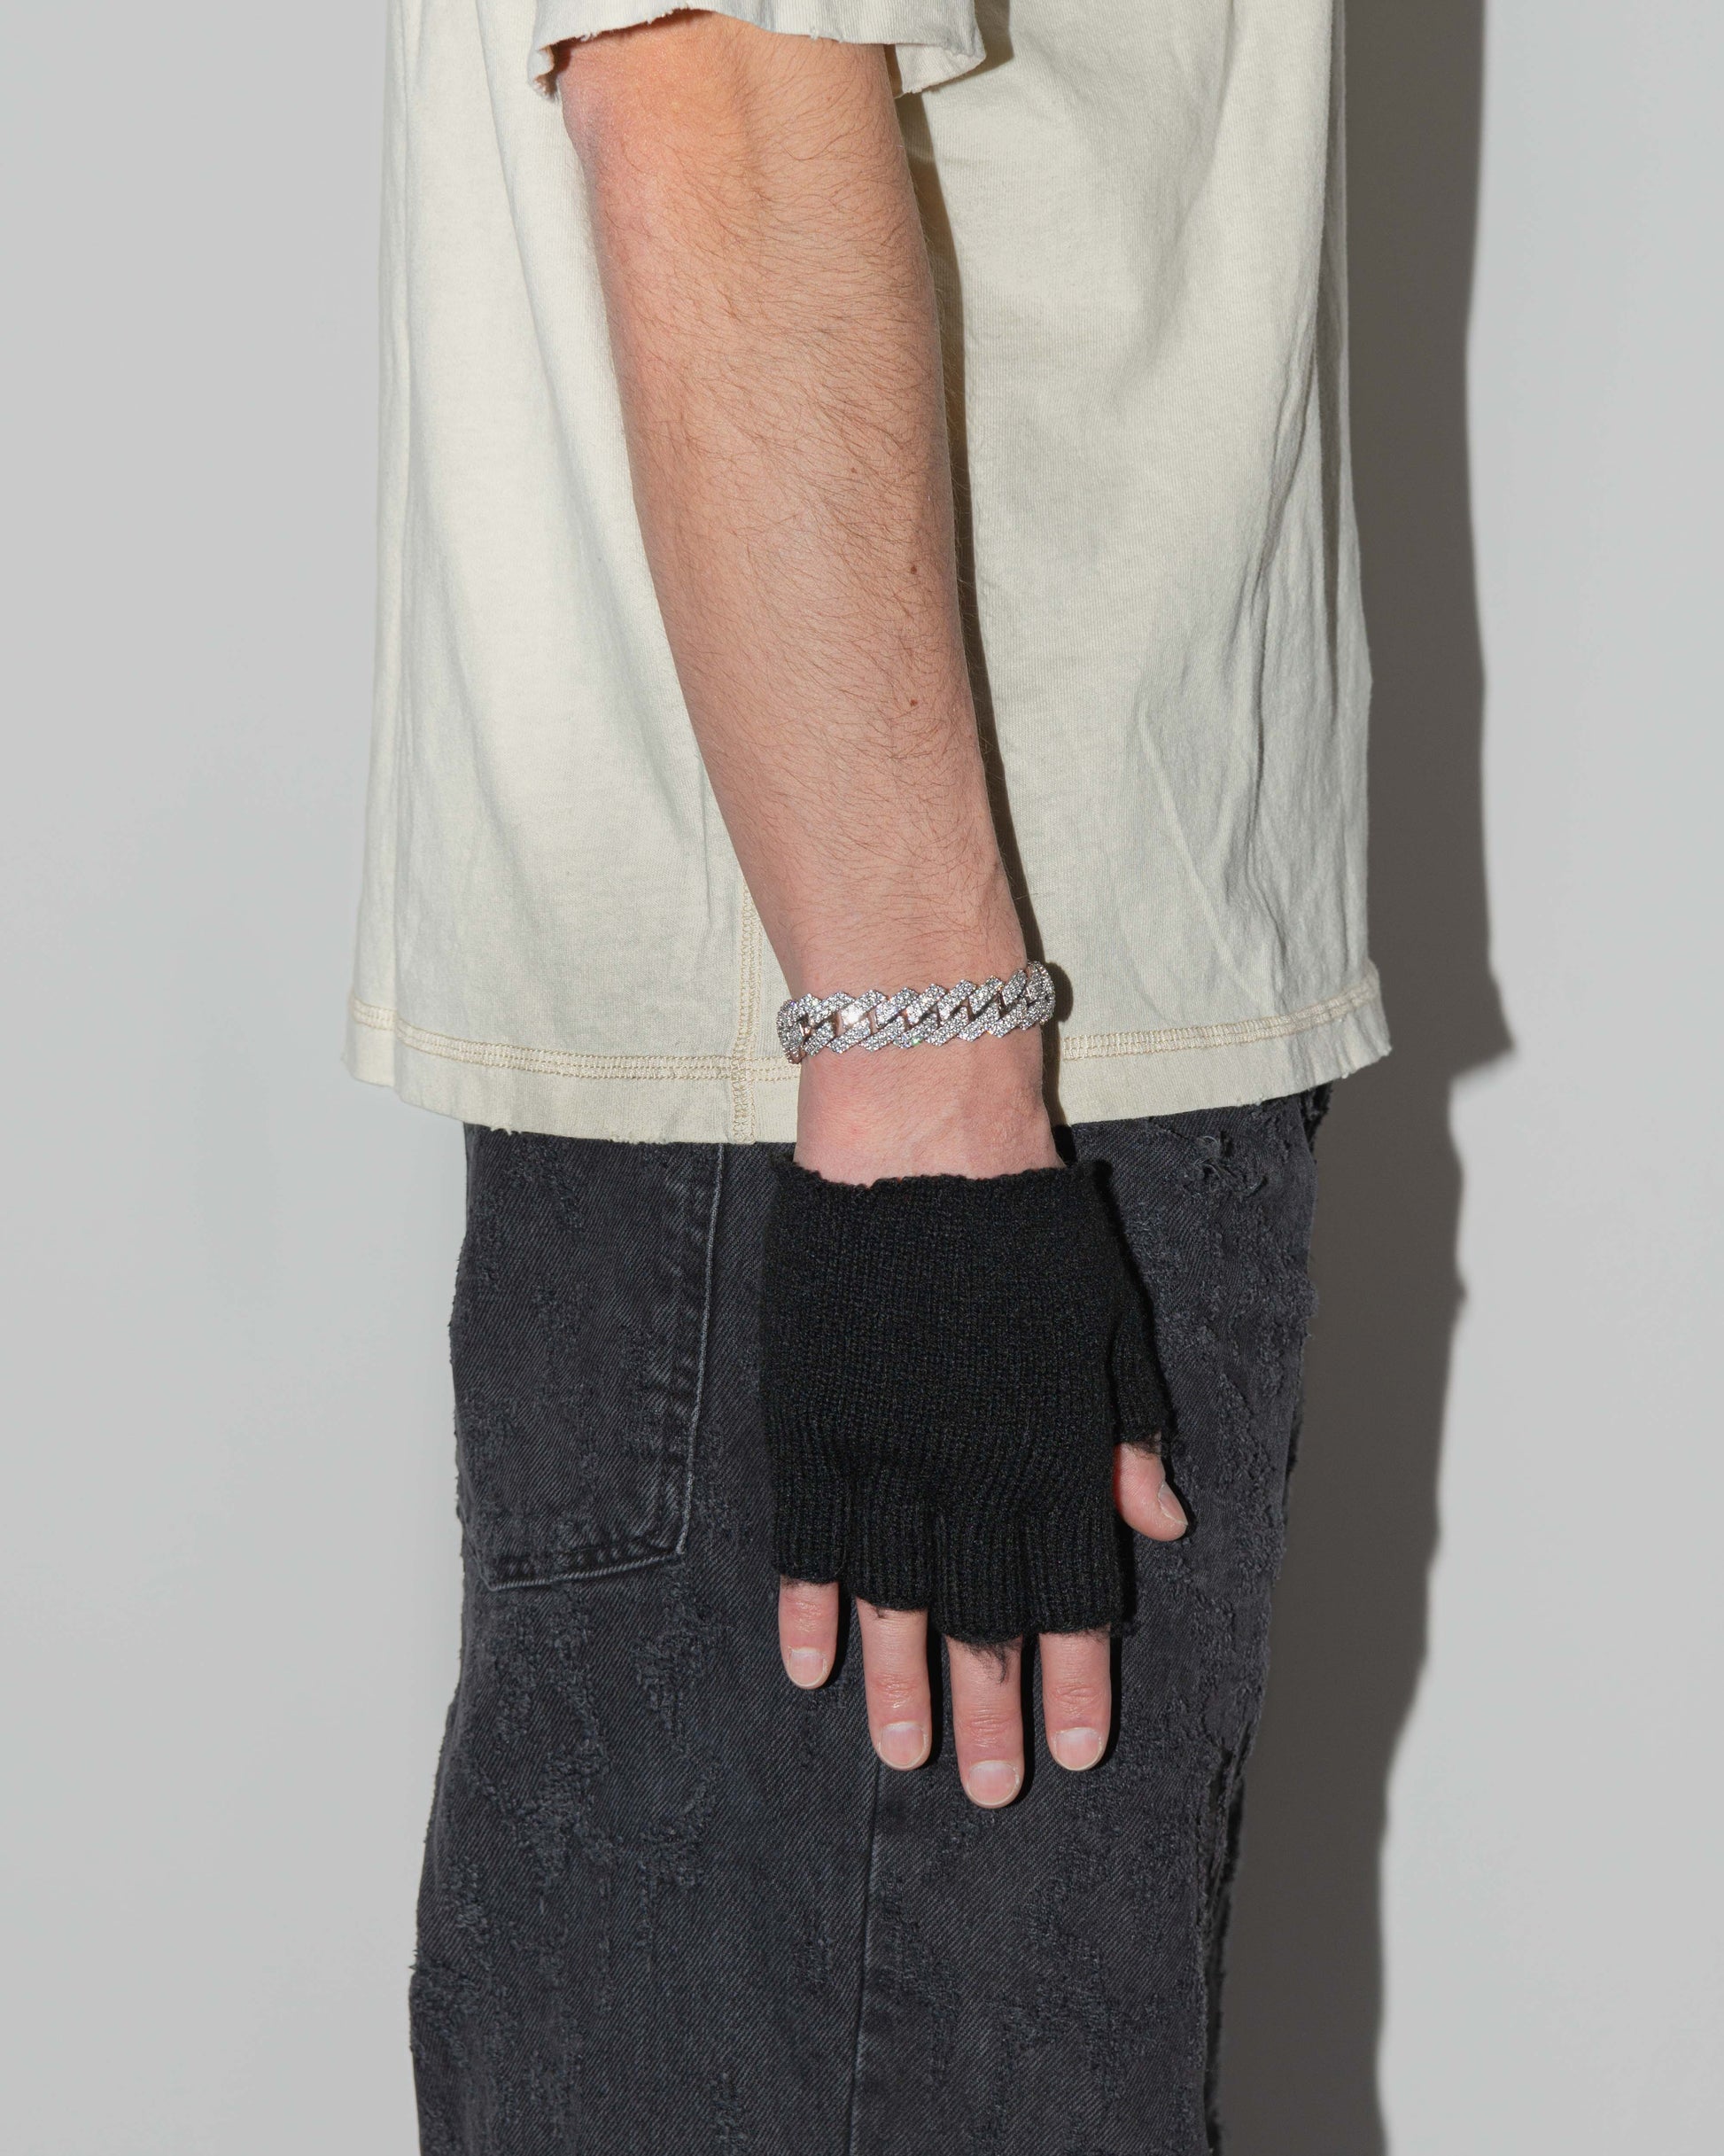 street style man wearing 18k white gold coated prong chain bracelet with hand-set micropavé stones in white